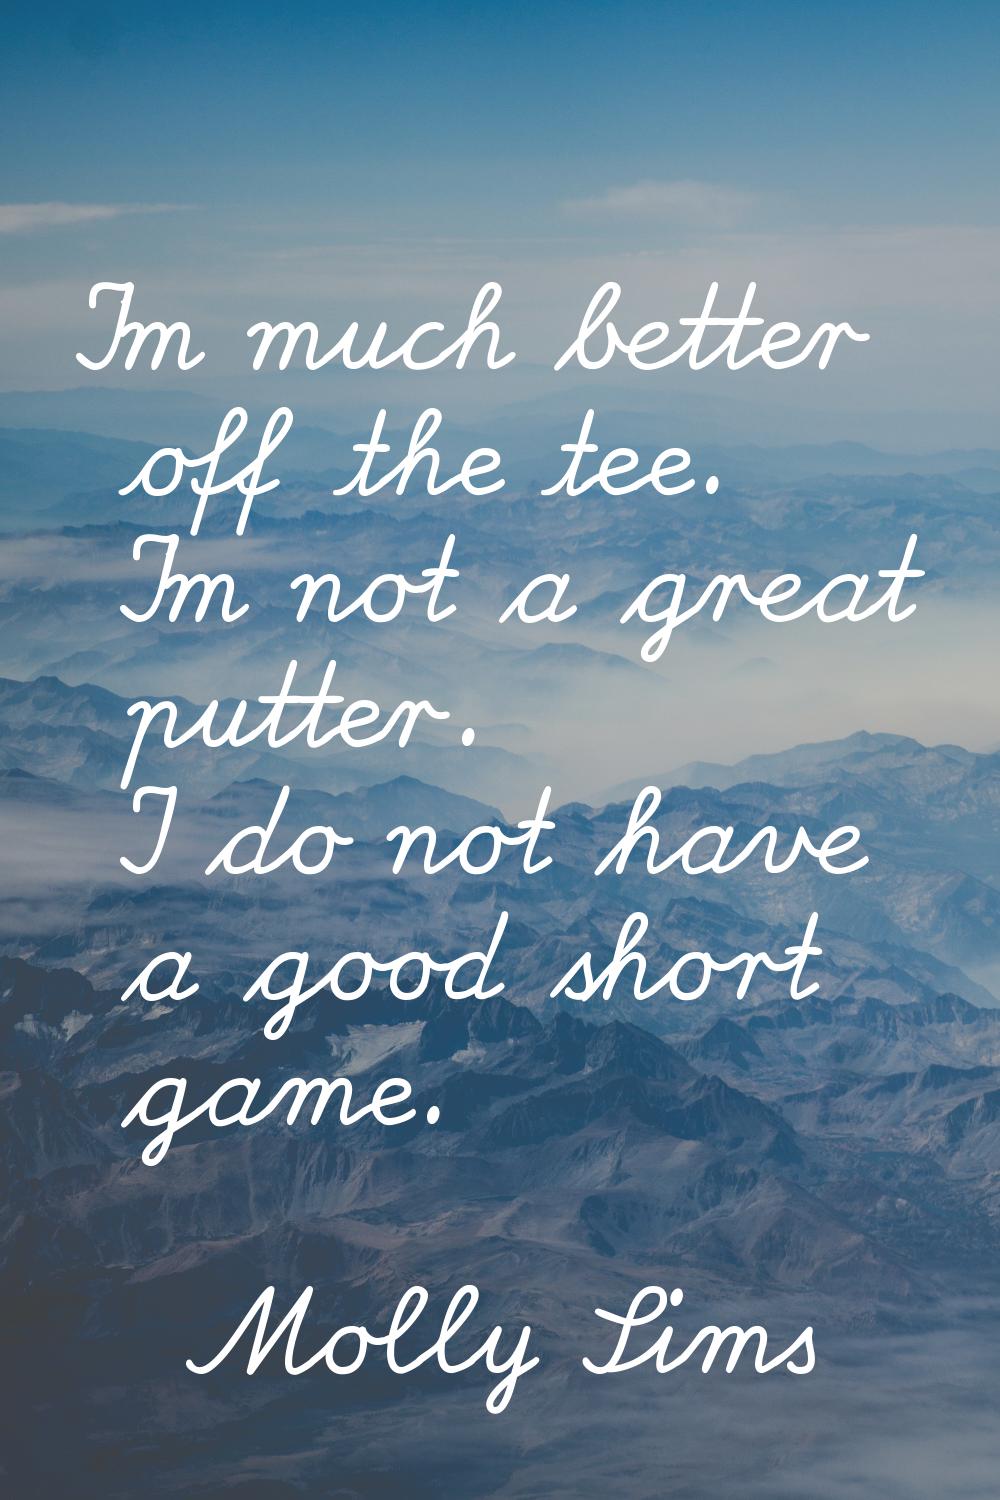 I'm much better off the tee. I'm not a great putter. I do not have a good short game.